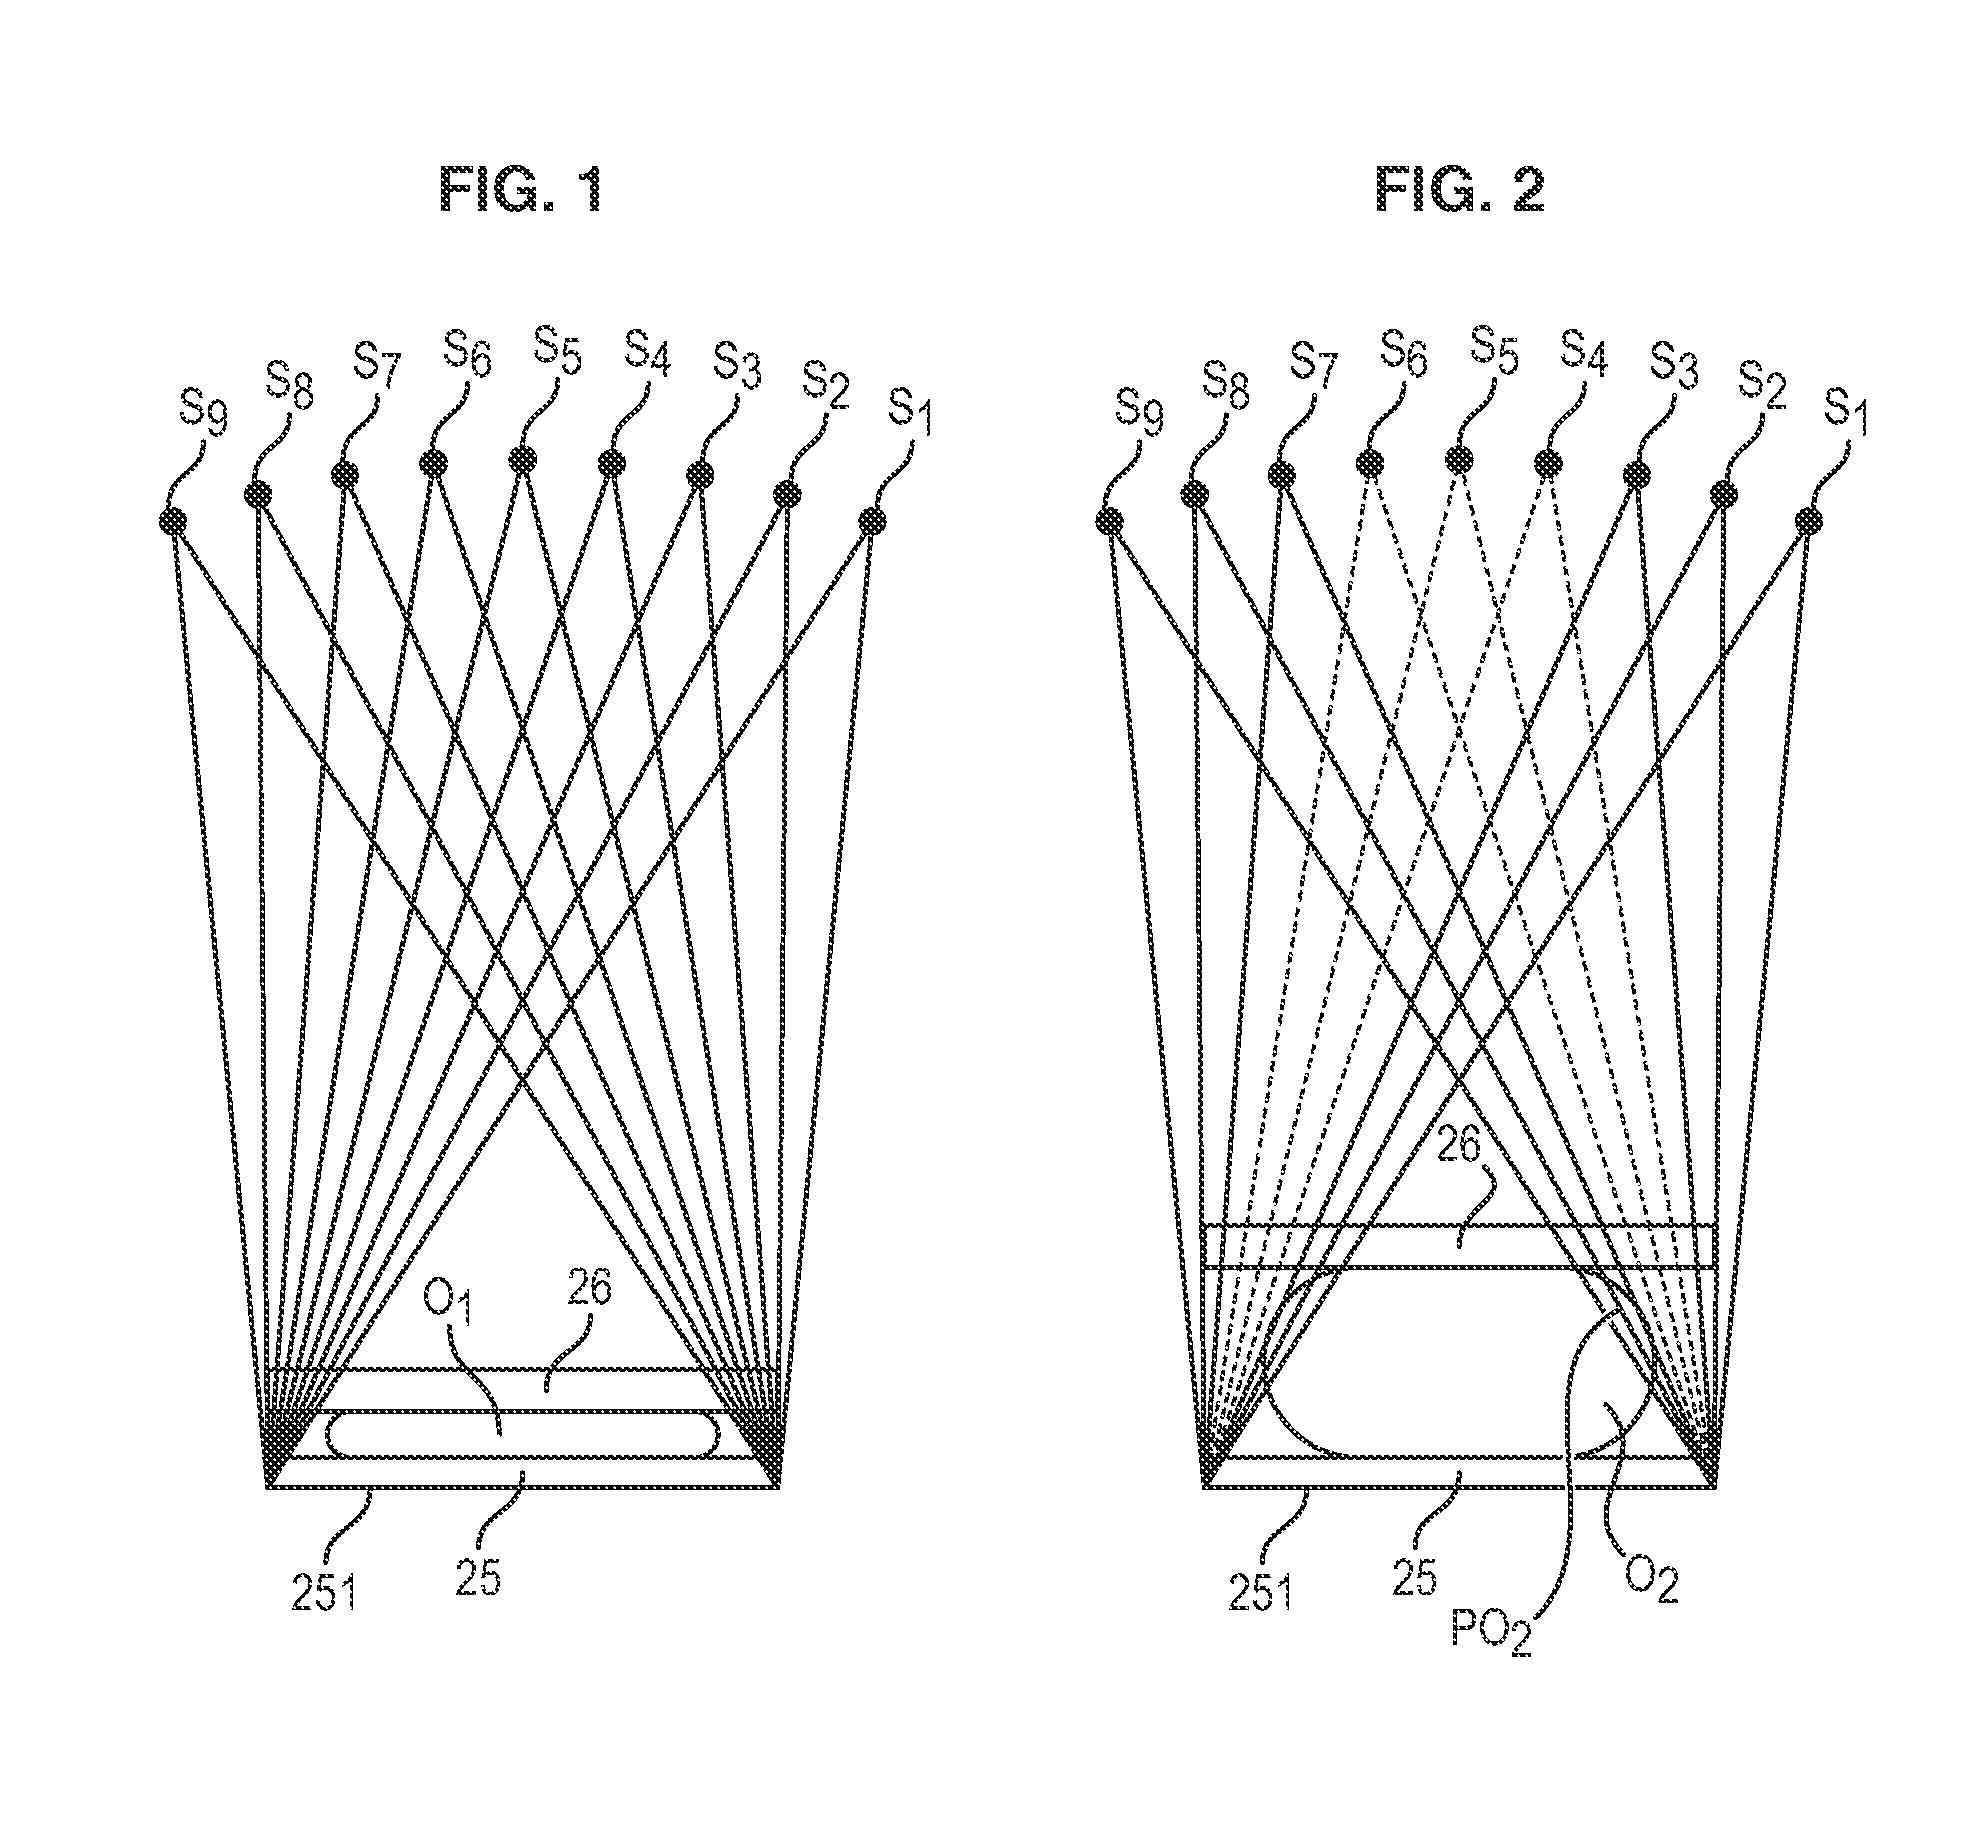 Method for assisted positioning of an organ on a platform of a medical imaging system